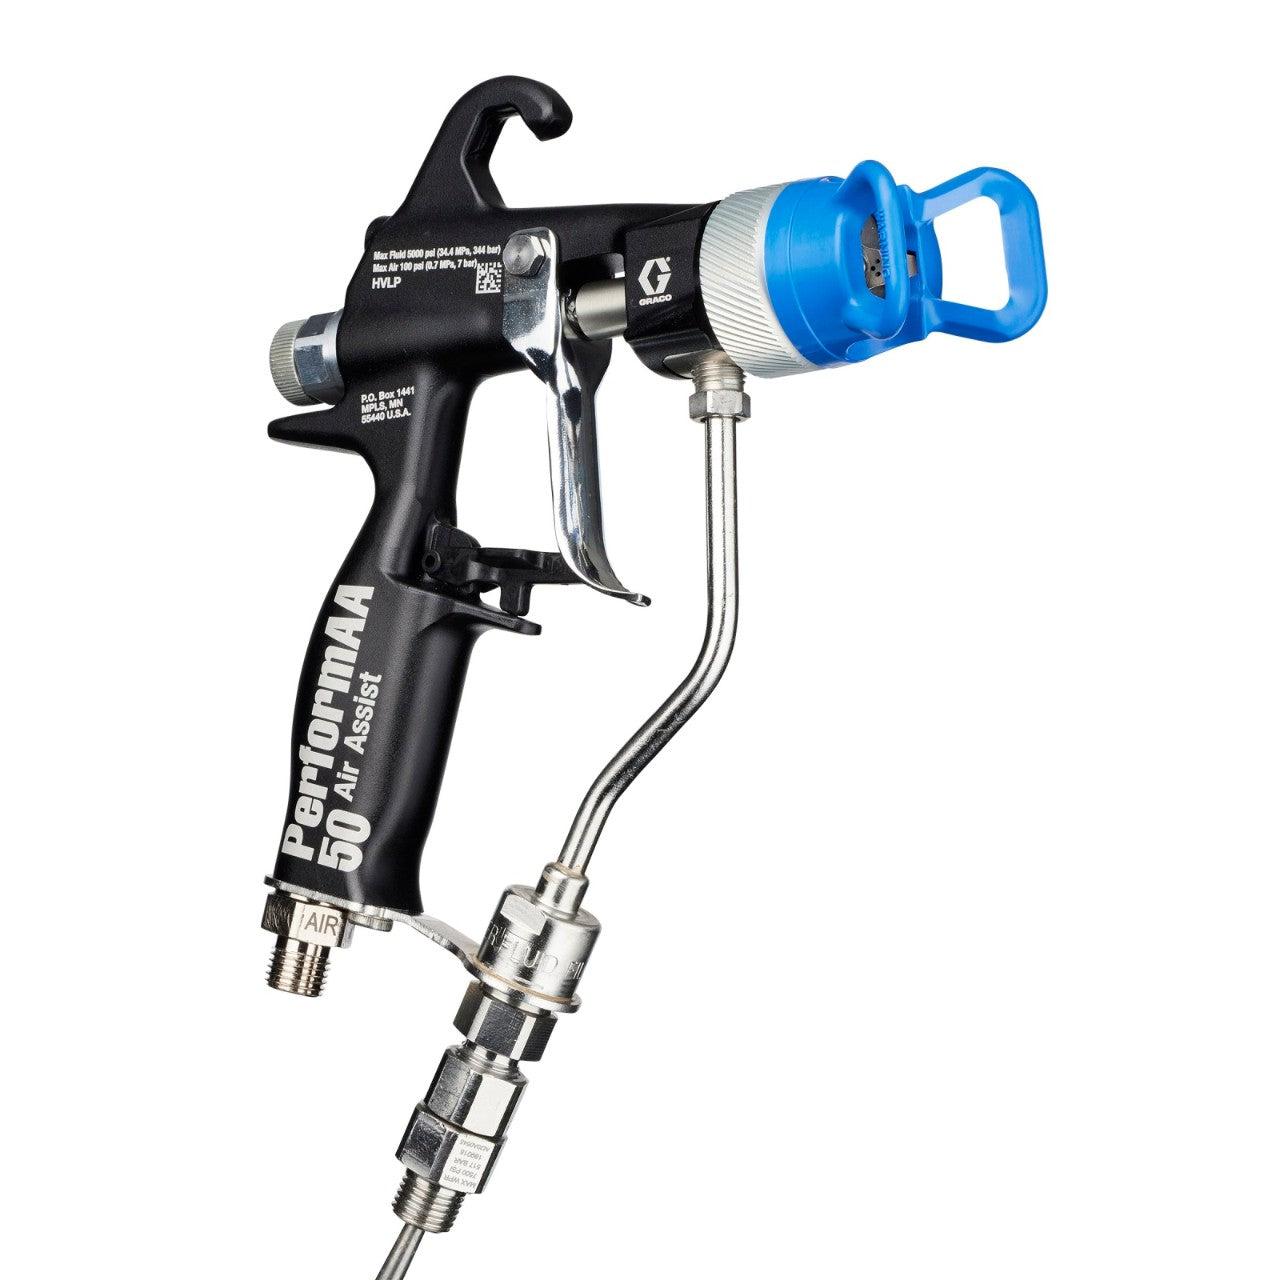 PerformAA 5000 Air Assist Gun with Wood Lacquer air cap and fluid swivel